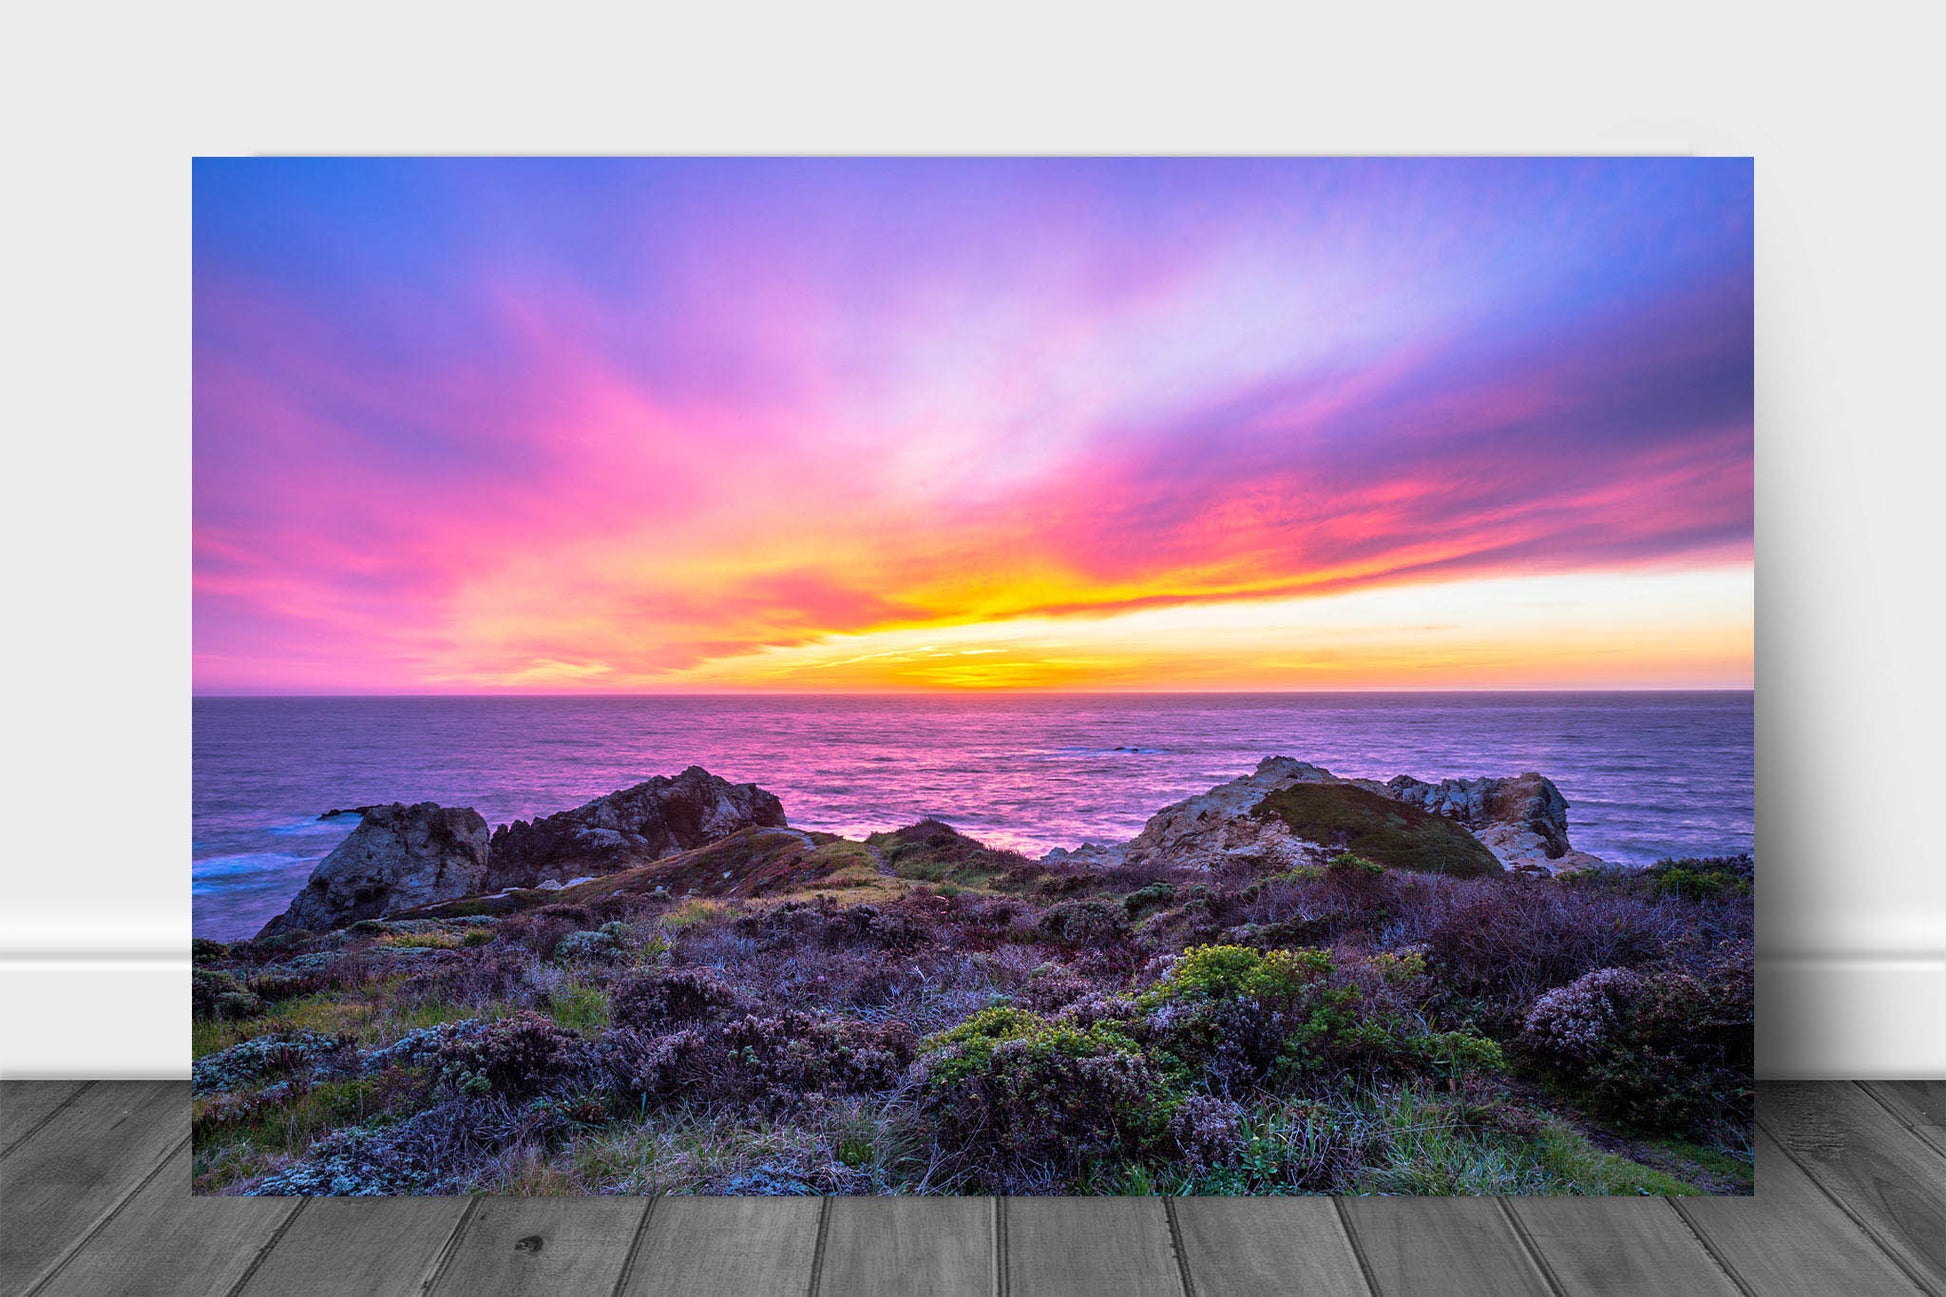 Coastal metal print on aluminum of a warm and colorful sunset over the Pacific Ocean along the coast of Big Sur, California by Sean Ramsey of Southern Plains Photography.